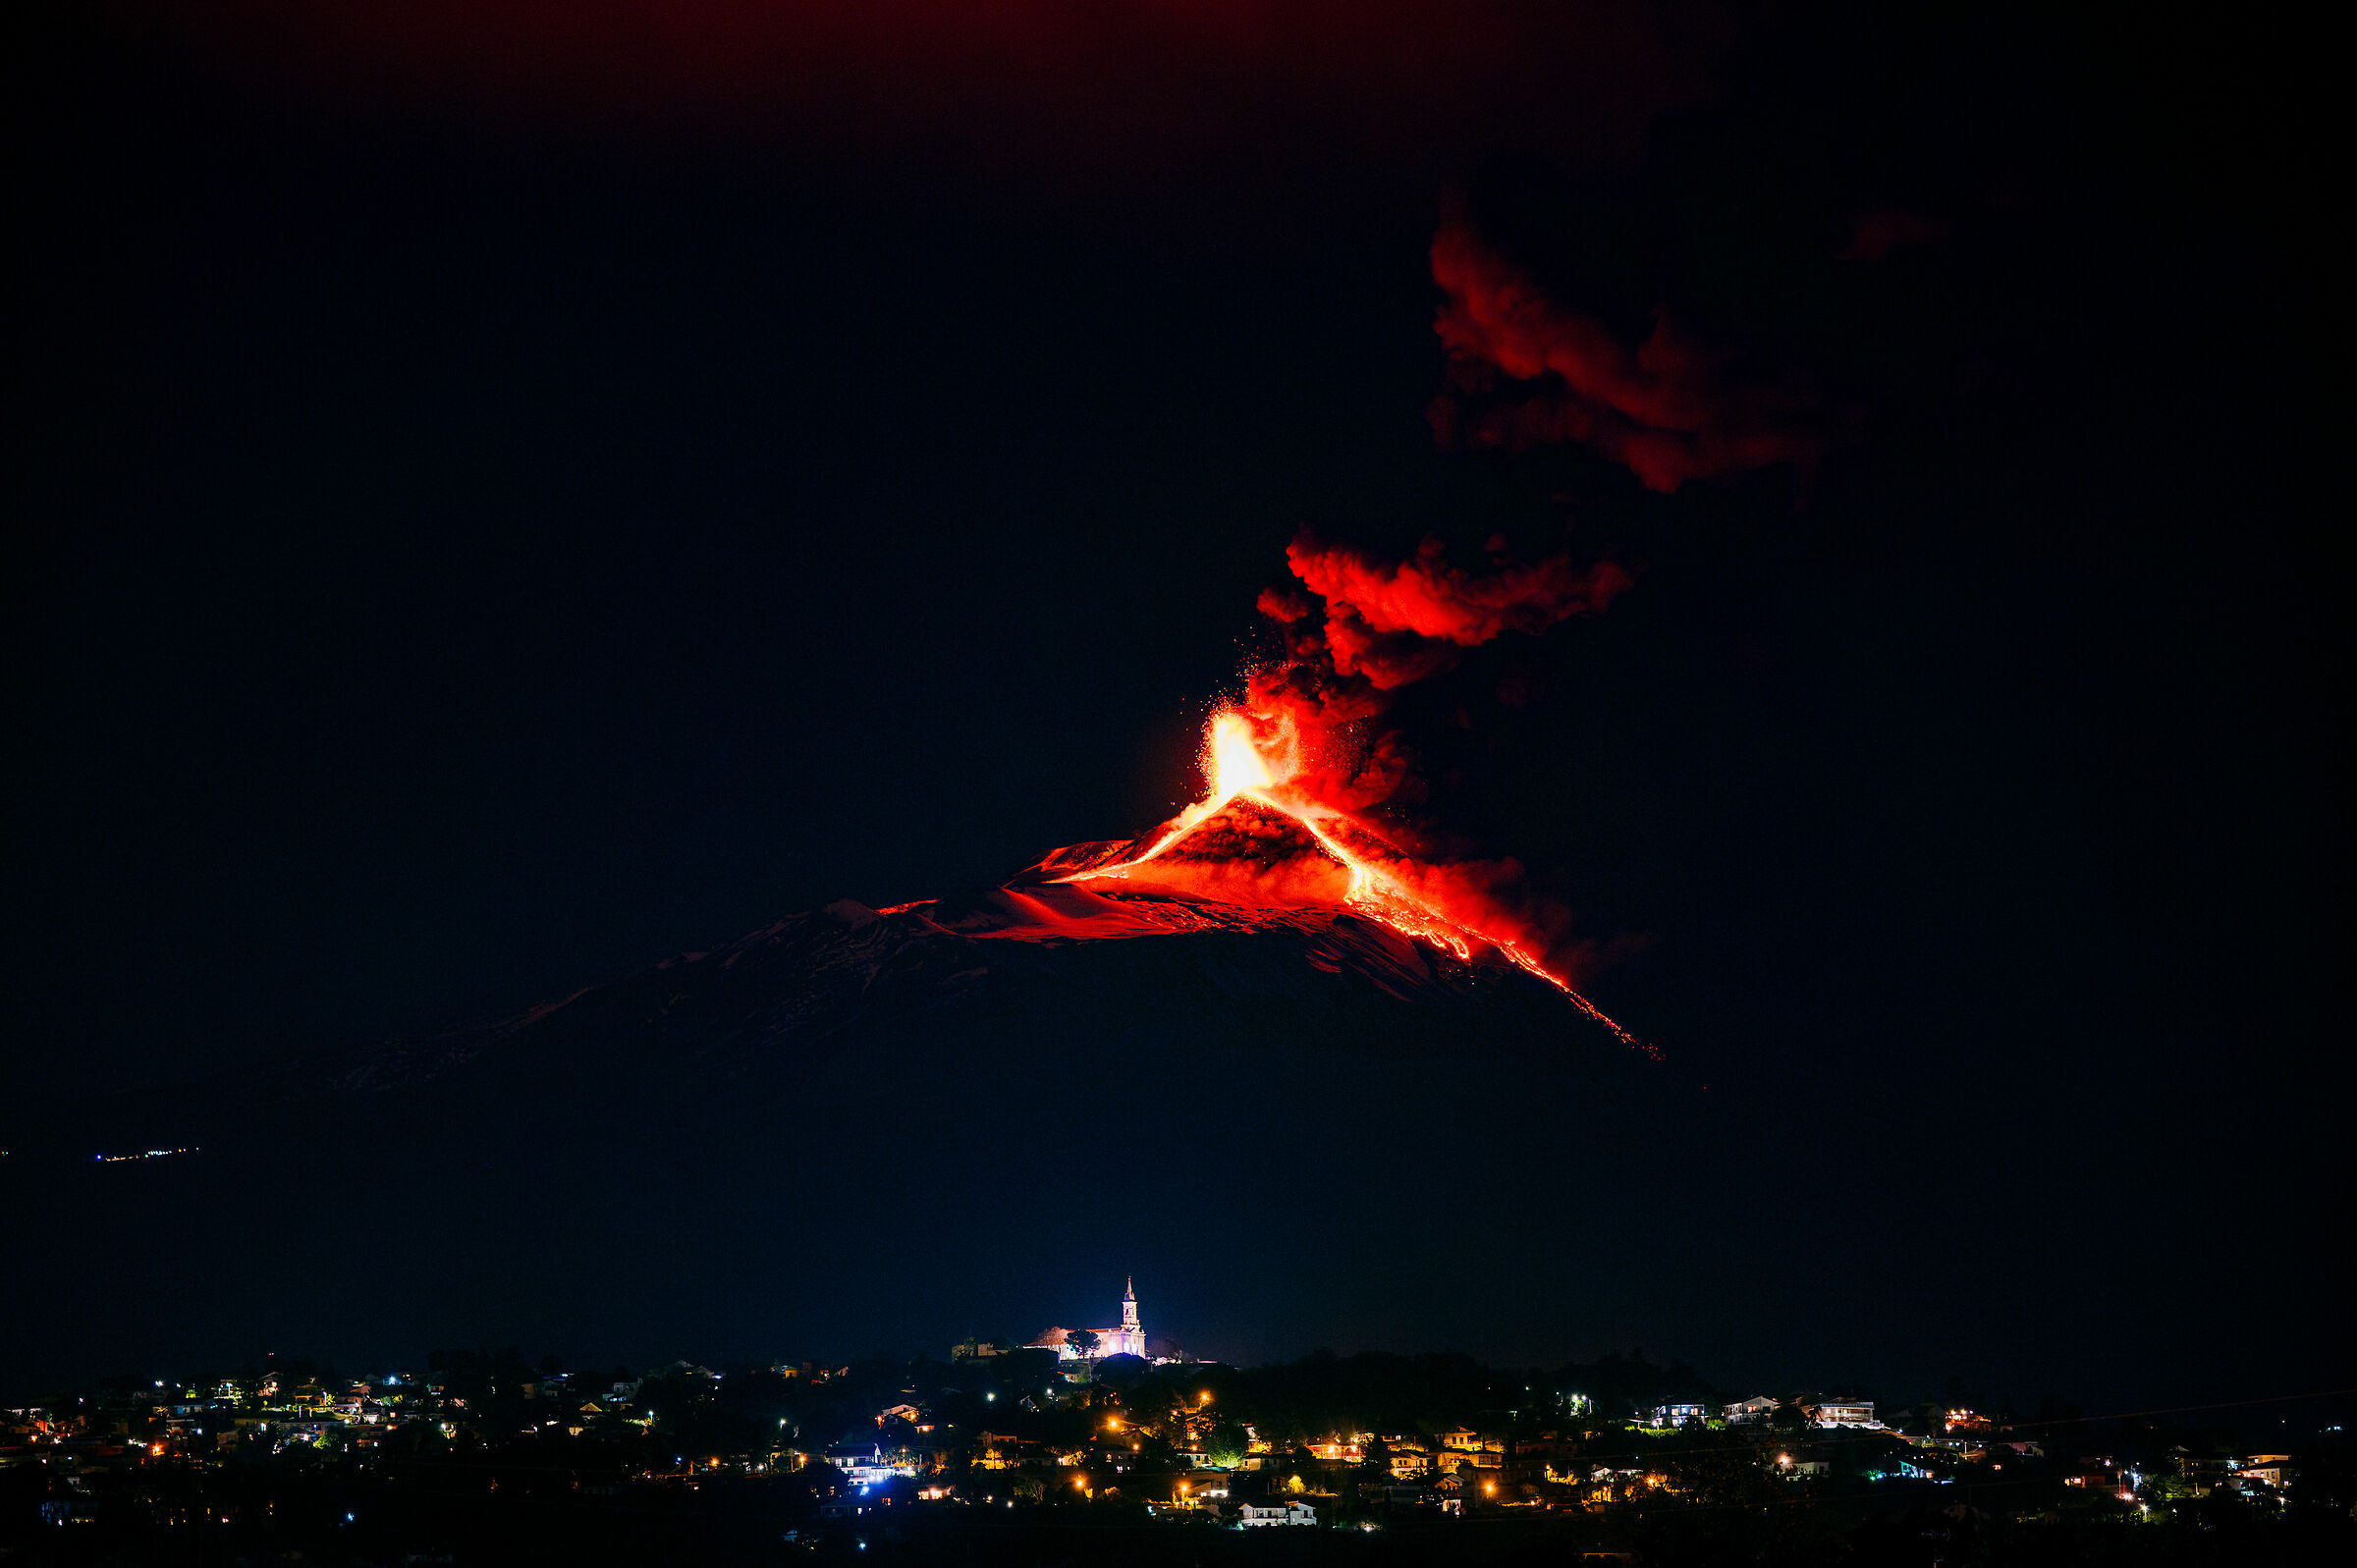 His majesty Etna...